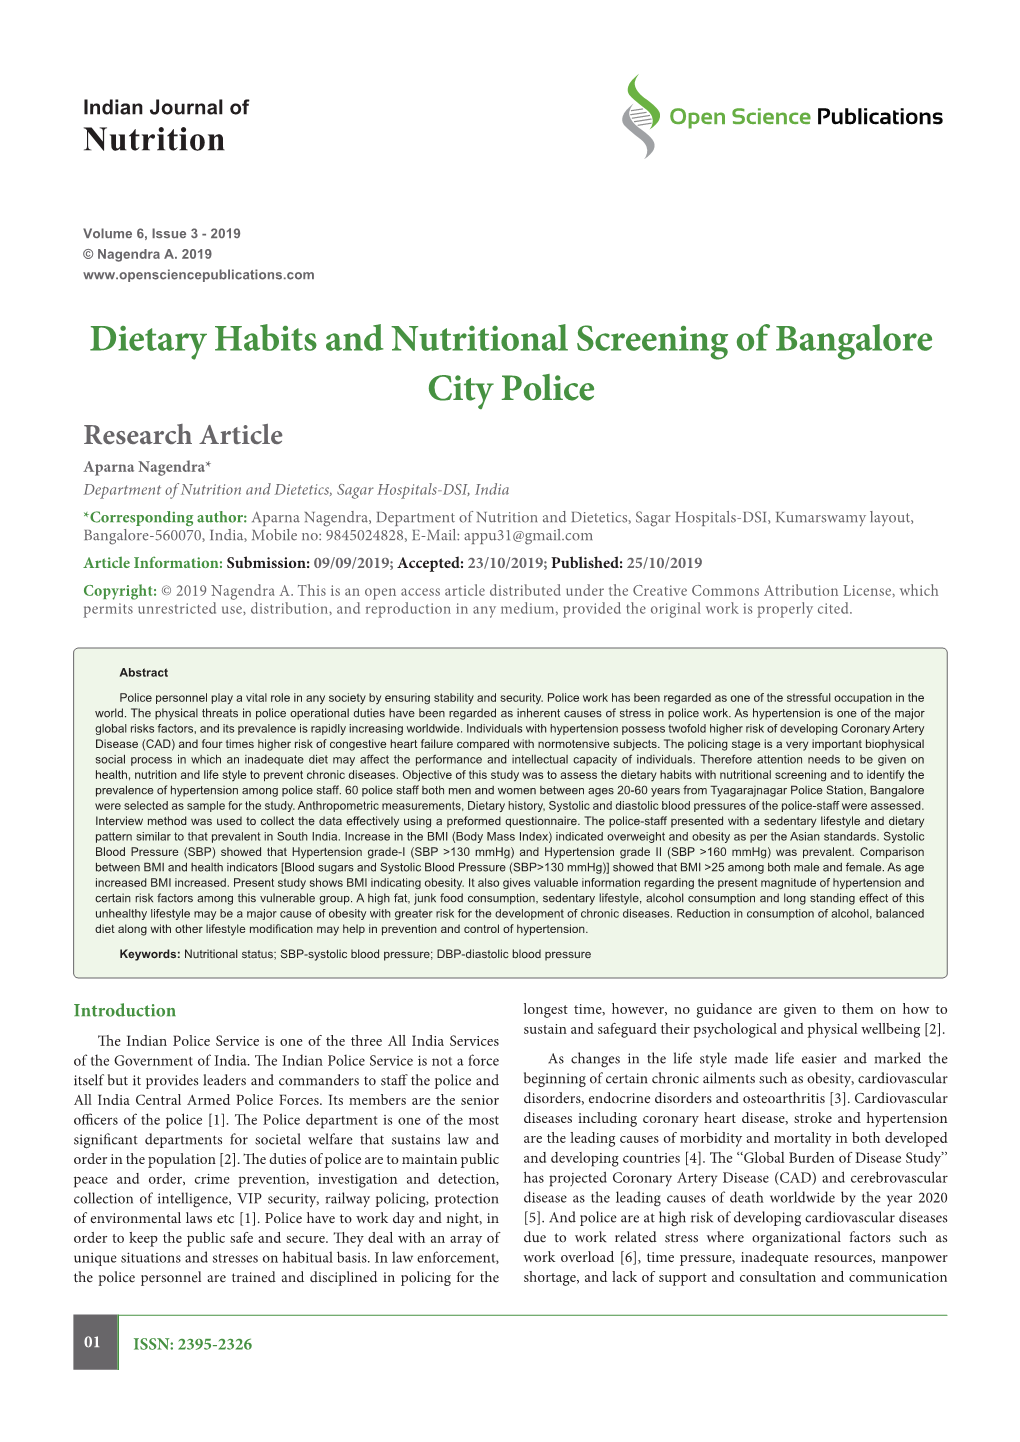 Dietary Habits and Nutritional Screening of Bangalore City Police